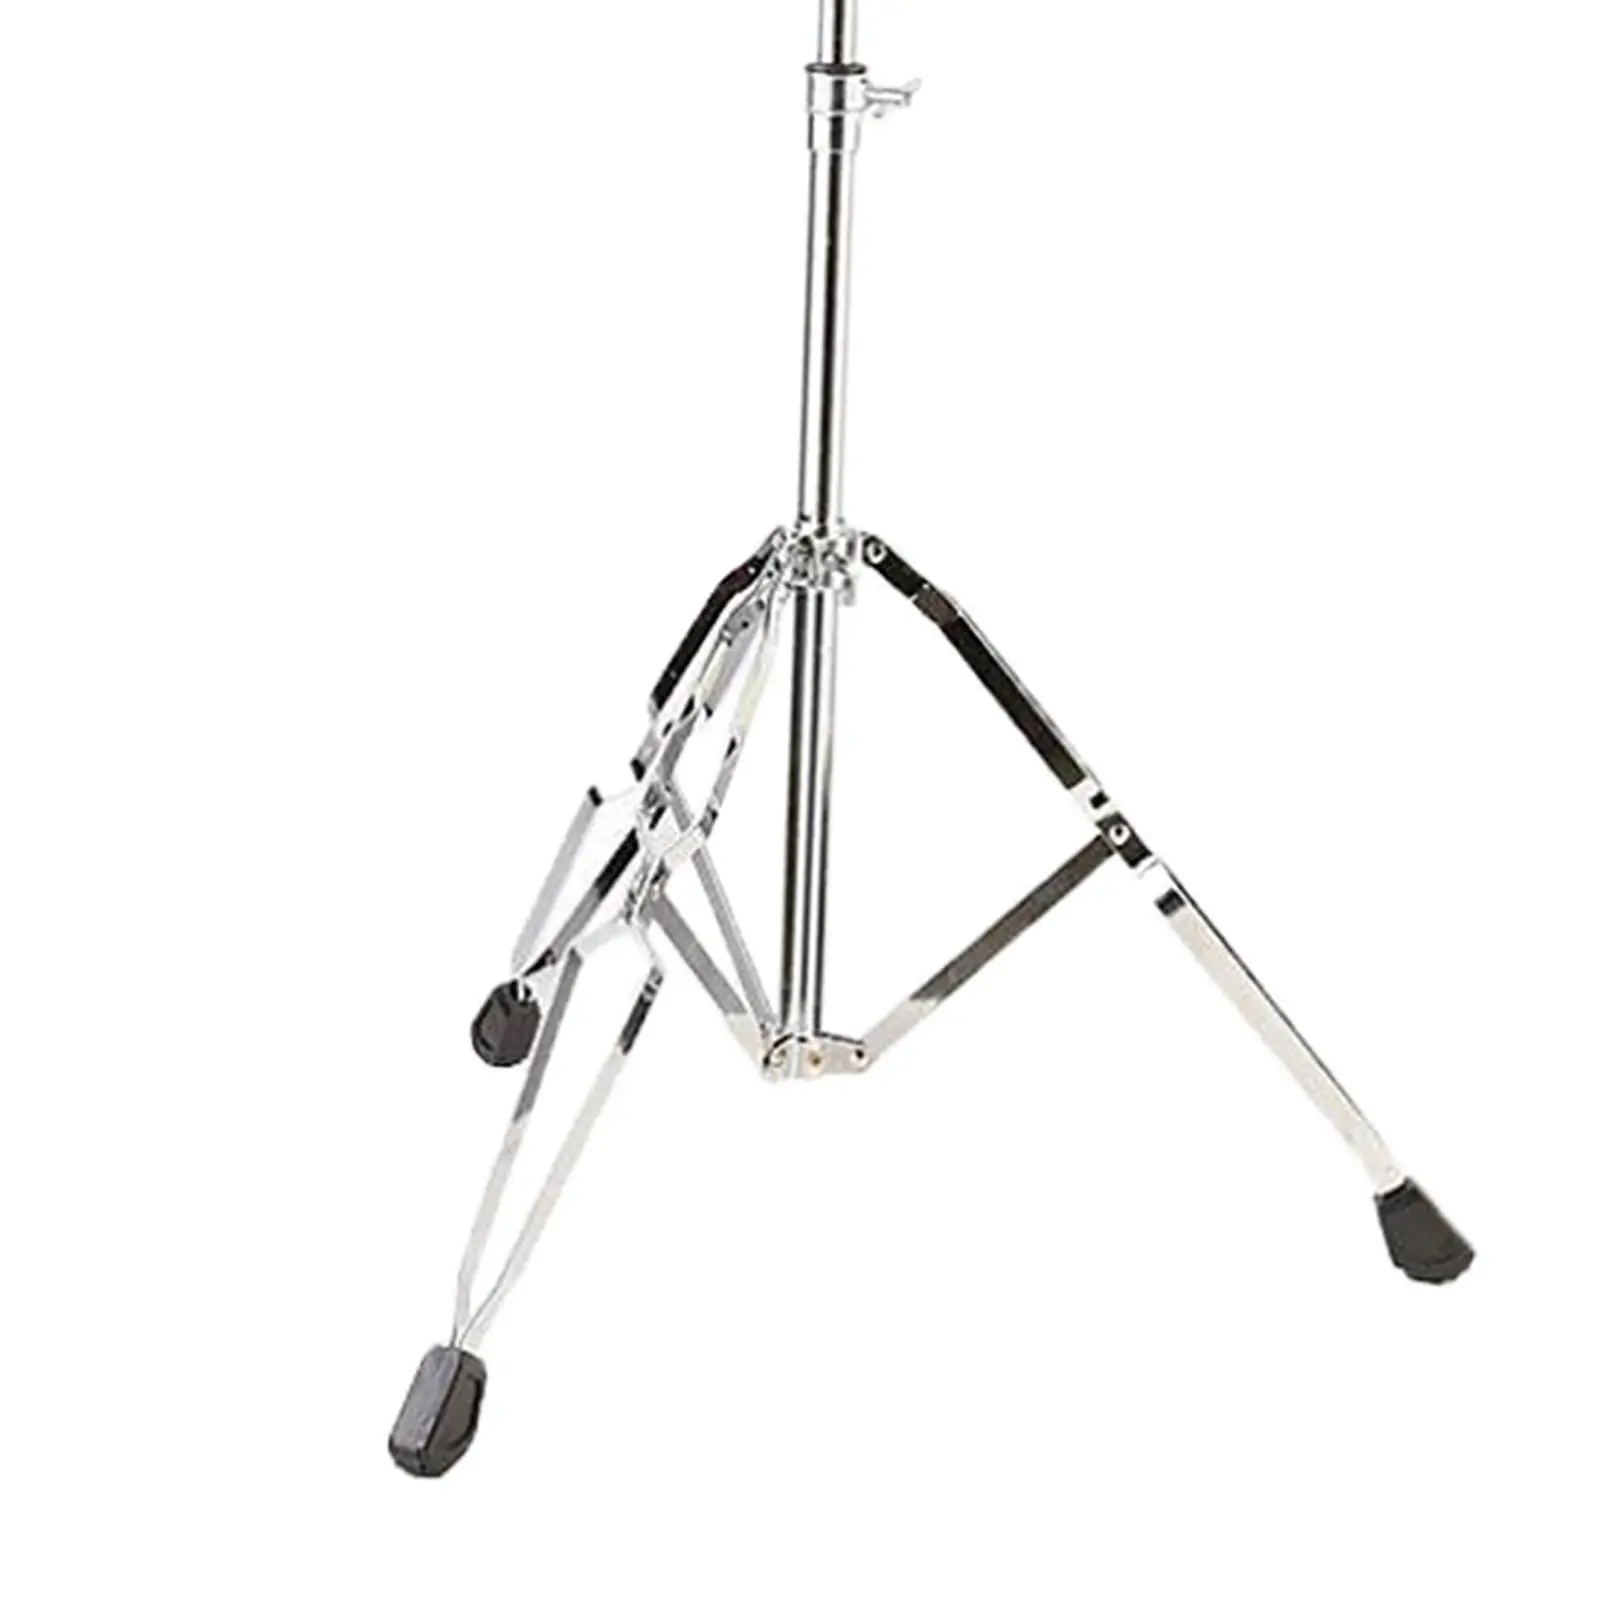 Metal Hi Hat Tripod Stand Swivel Legs Folding Bracket Cymbal Stand Foldable Percussion Instrument Parts Holder Accessories